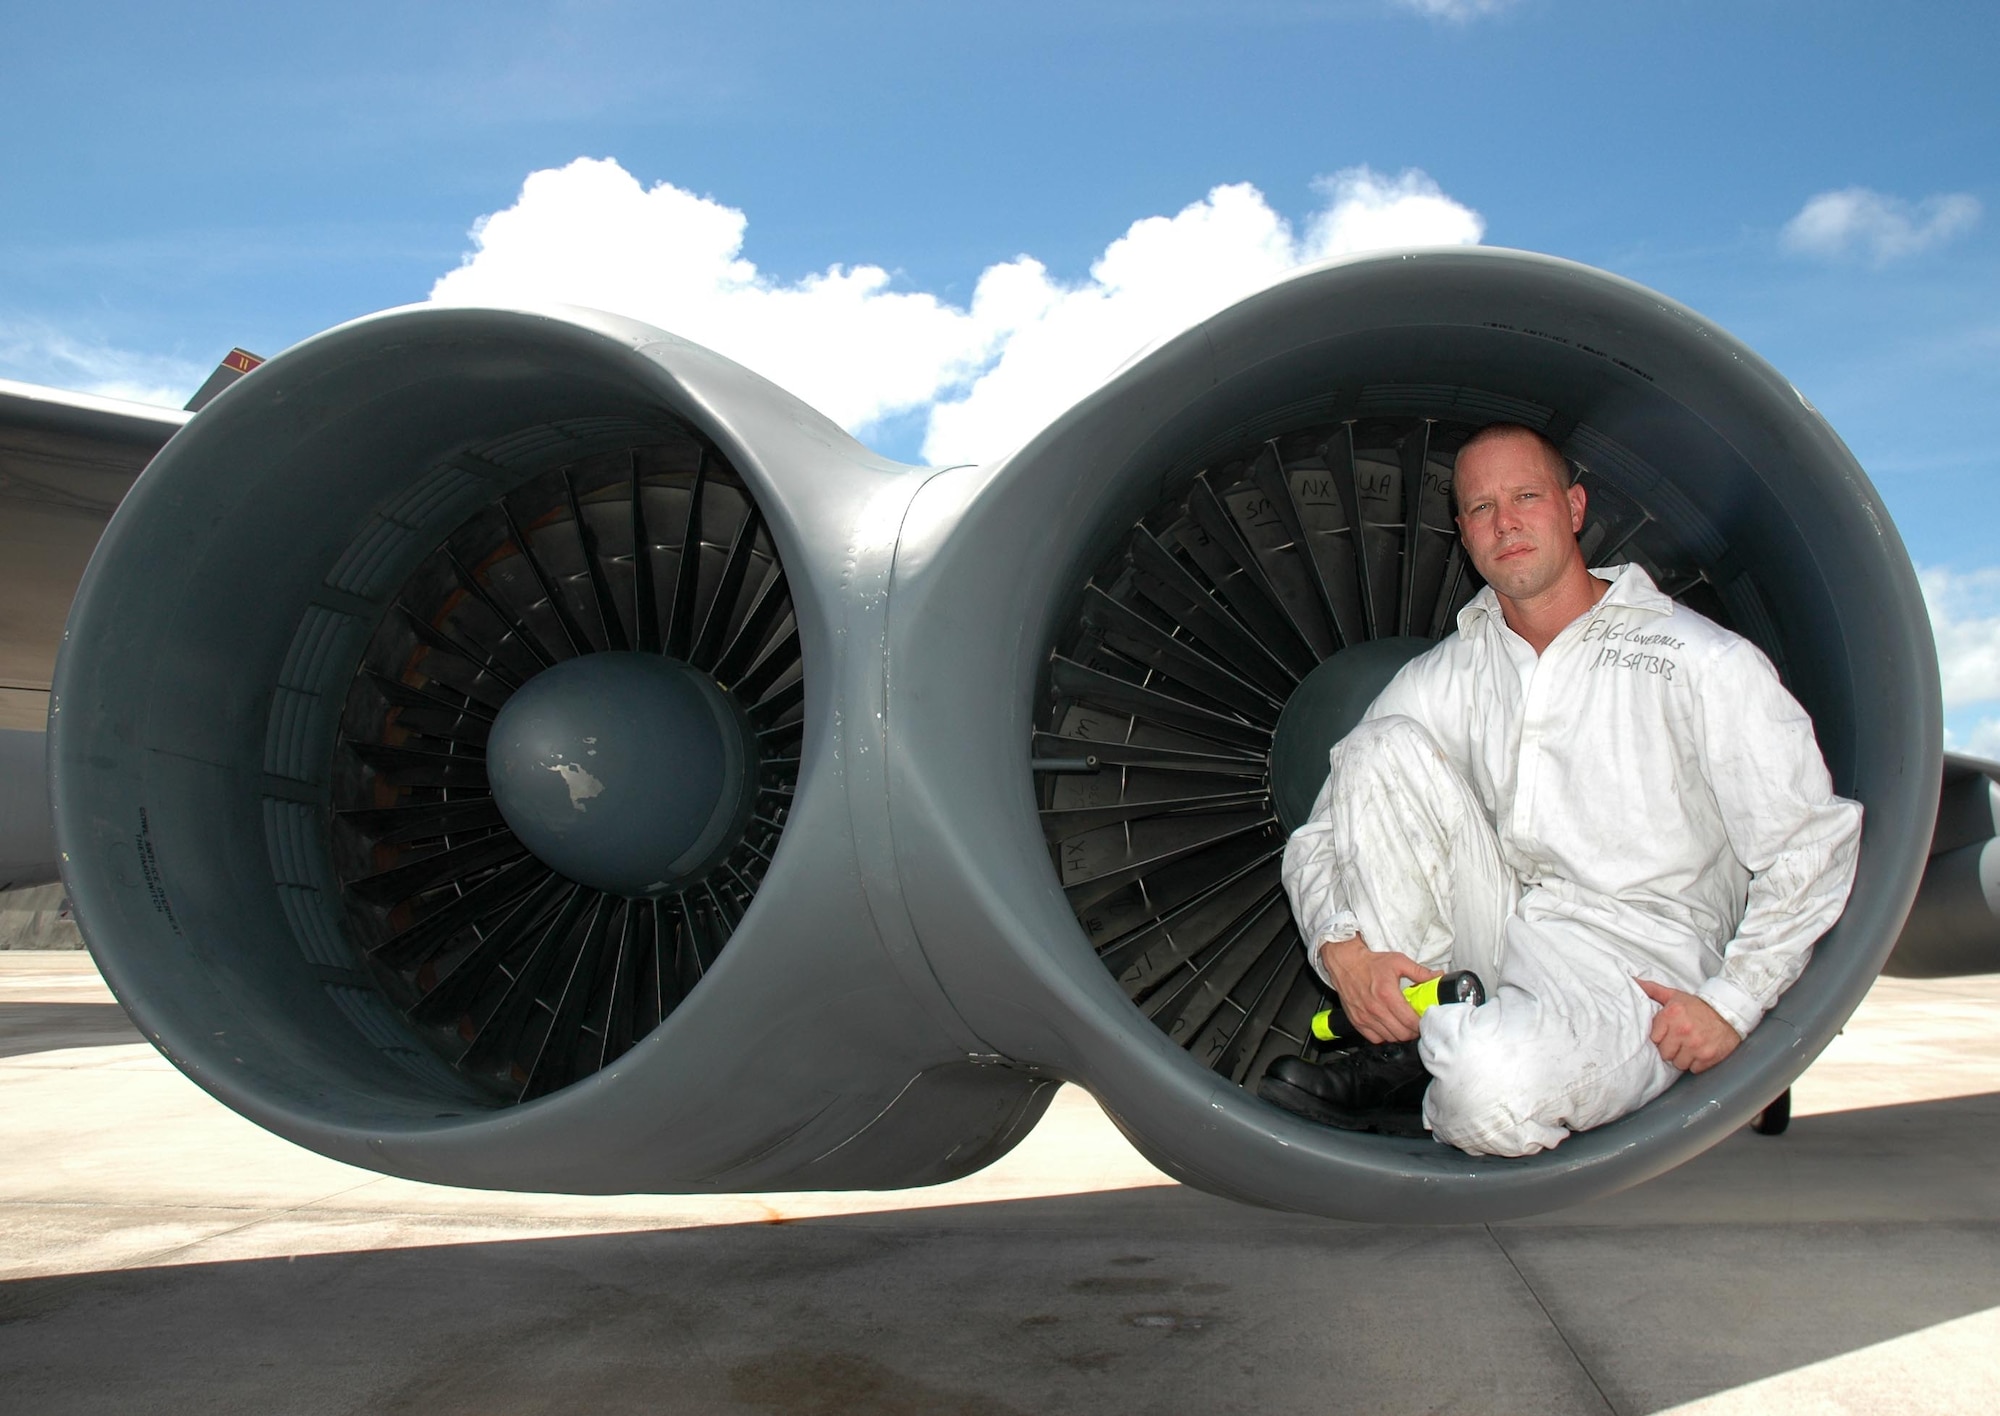 Tech. Sgt. Timothy Scheaffer prepares to do engine work on a B-52 Stratofortress at Andersen Air Force Base, Guam, on Sept. 18, 2006. He is an aerospace propulsion craftsman deployed to the 36th Expeditionary Aircraft Maintenance Squadron at this base from Minot Air Force Base, N.D. (U.S. Air Force photo/Marine Cpl. Ashleigh Bryant)  